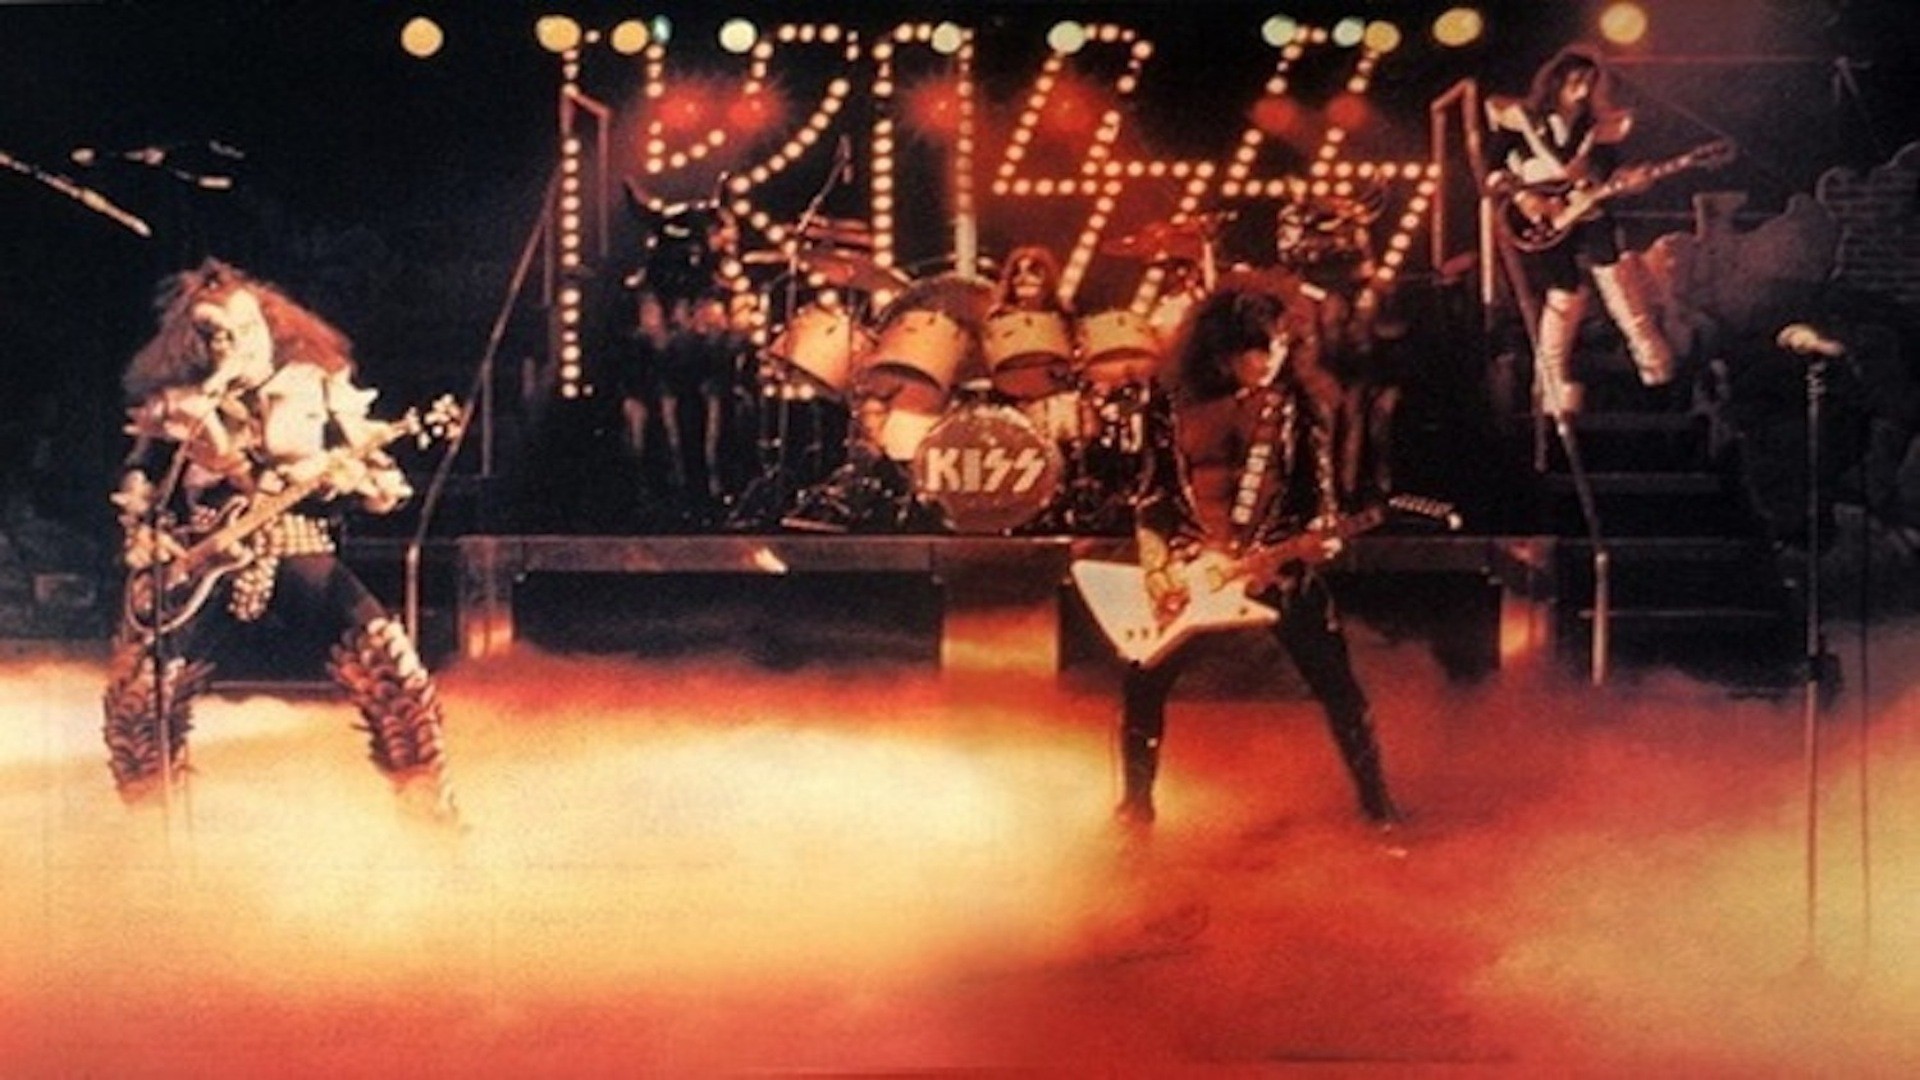 1920x1080 Kiss Rock and Roll Over Tour